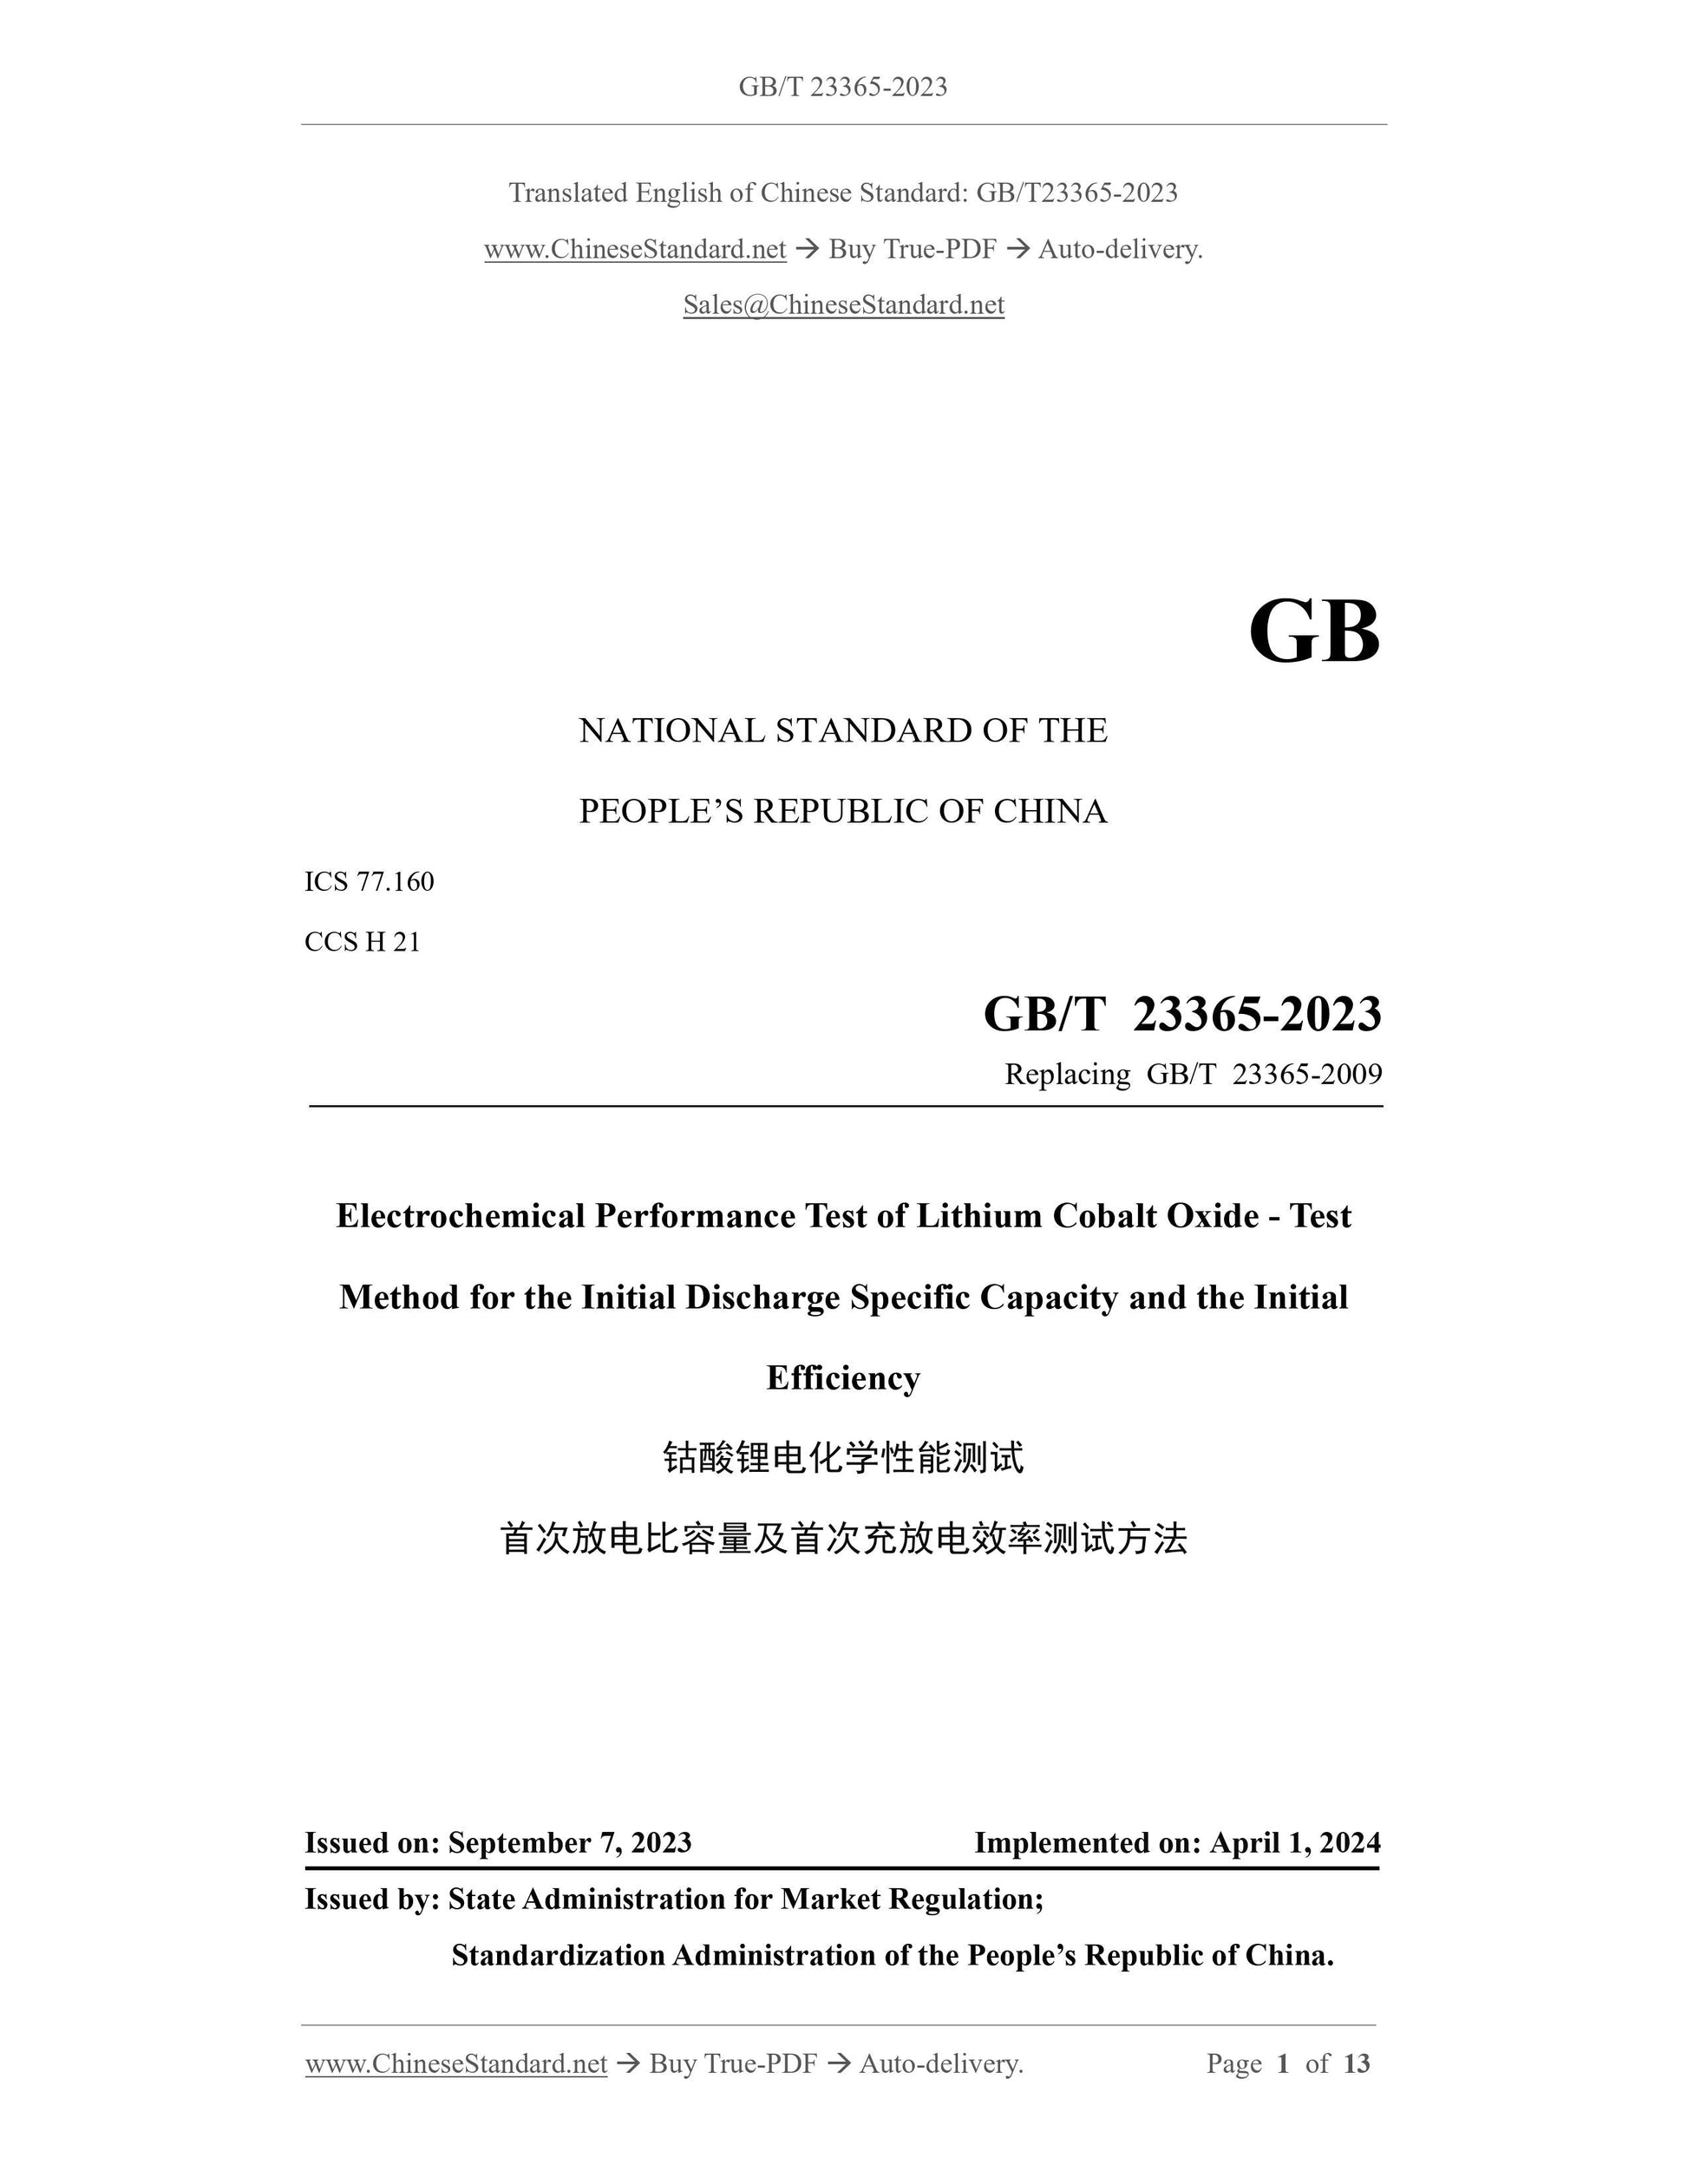 GB/T 23365-2023 Page 1